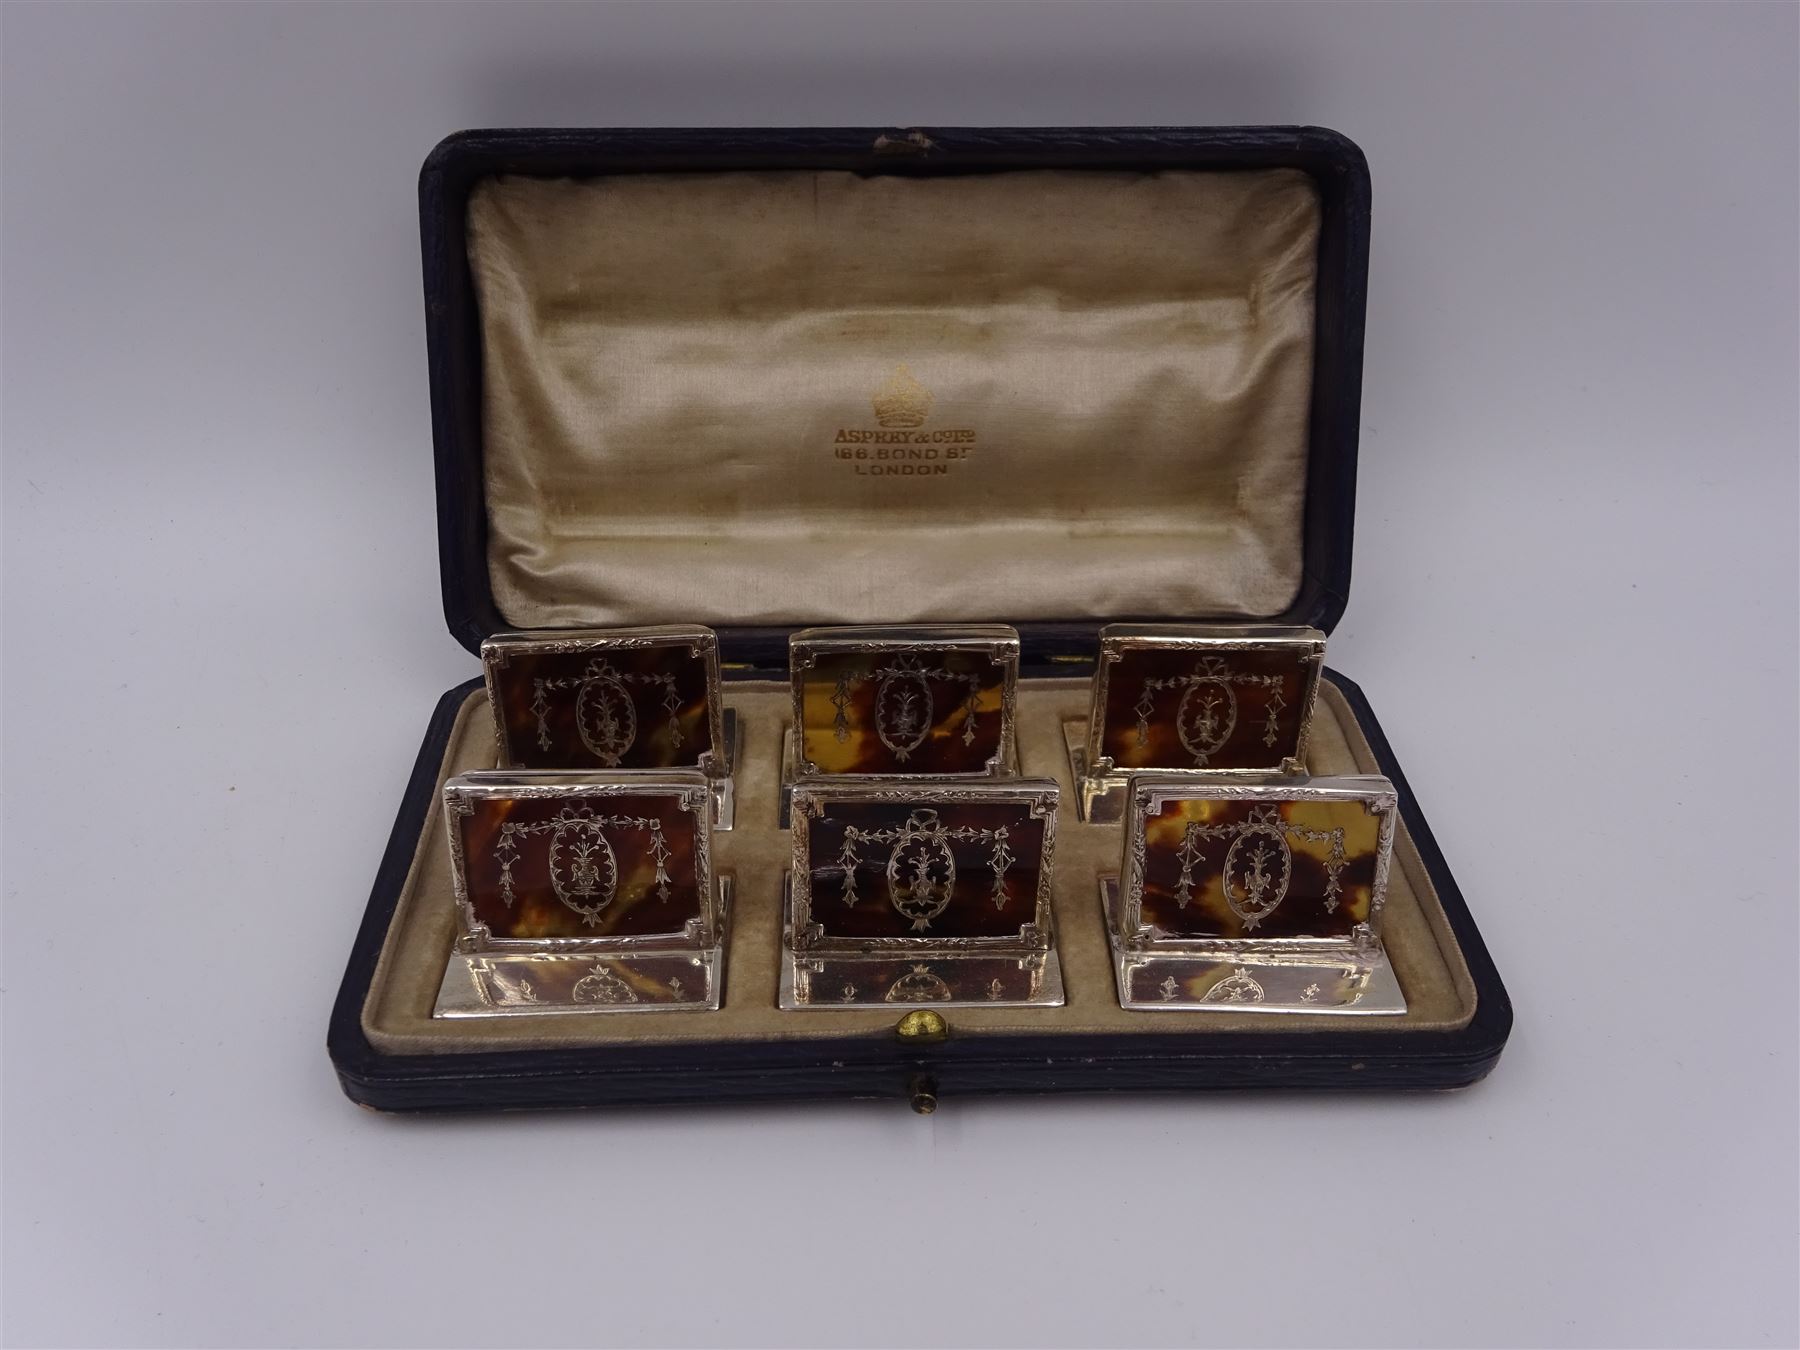 Set of six early 20th century silver mounted tortoiseshell place card holders by Asprey - Image 16 of 28